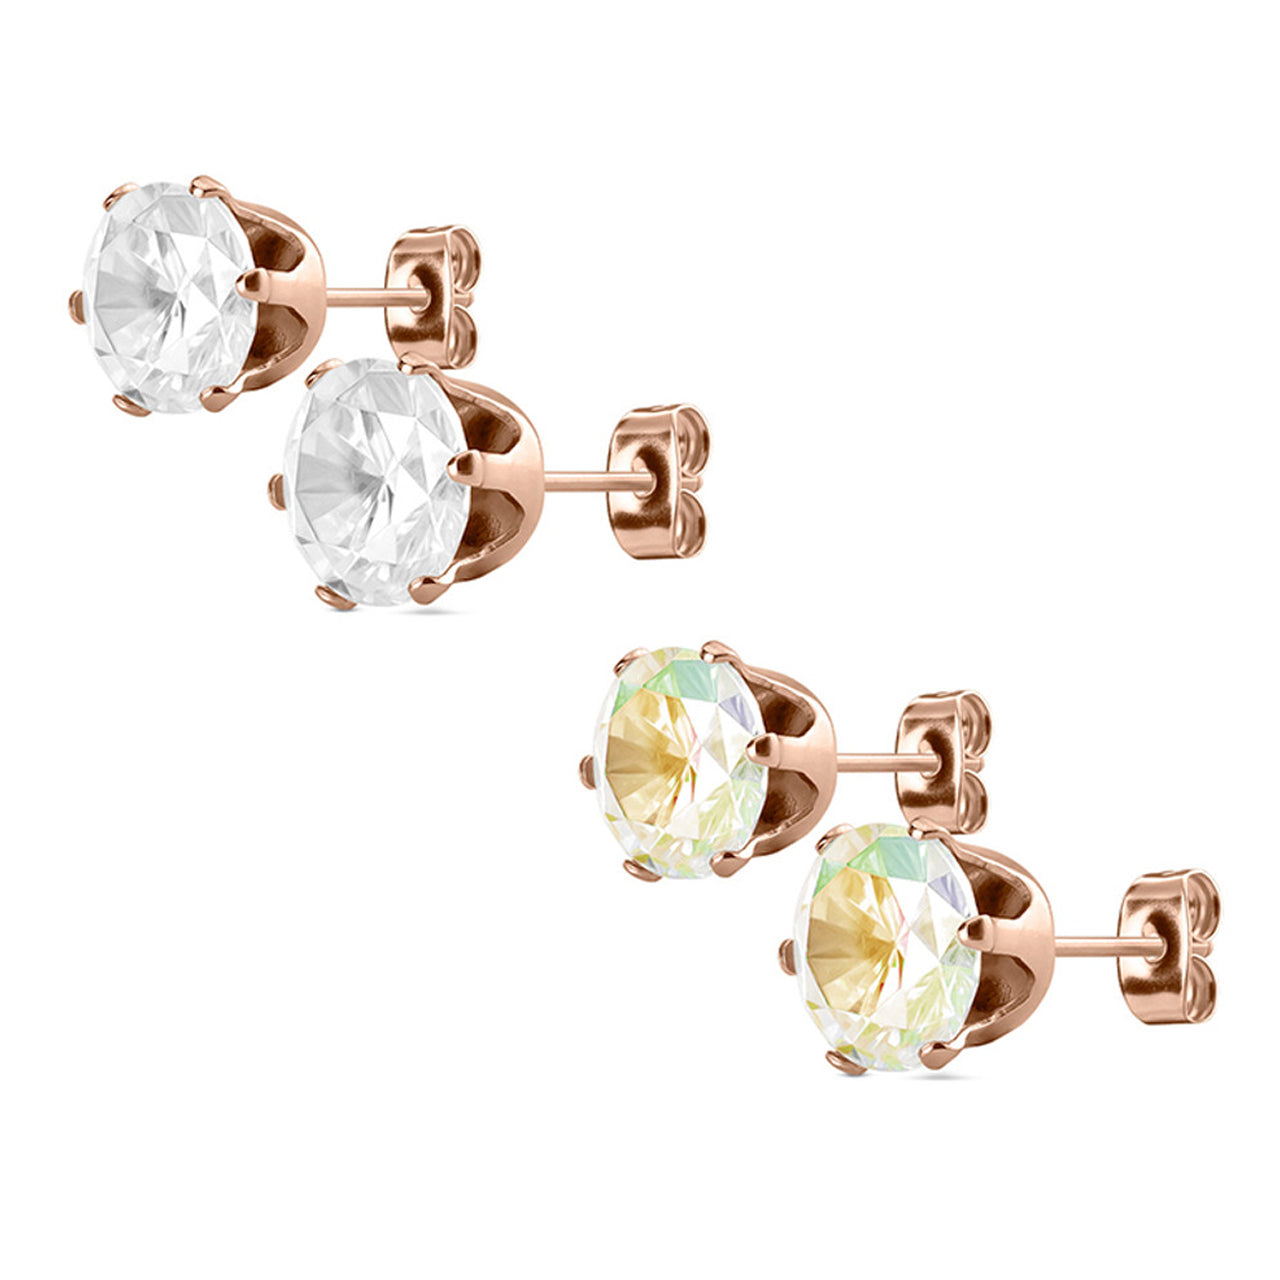 Surgical Steel Earring Stud 20 Gauge Rose Gold IP with Round CZ Gem